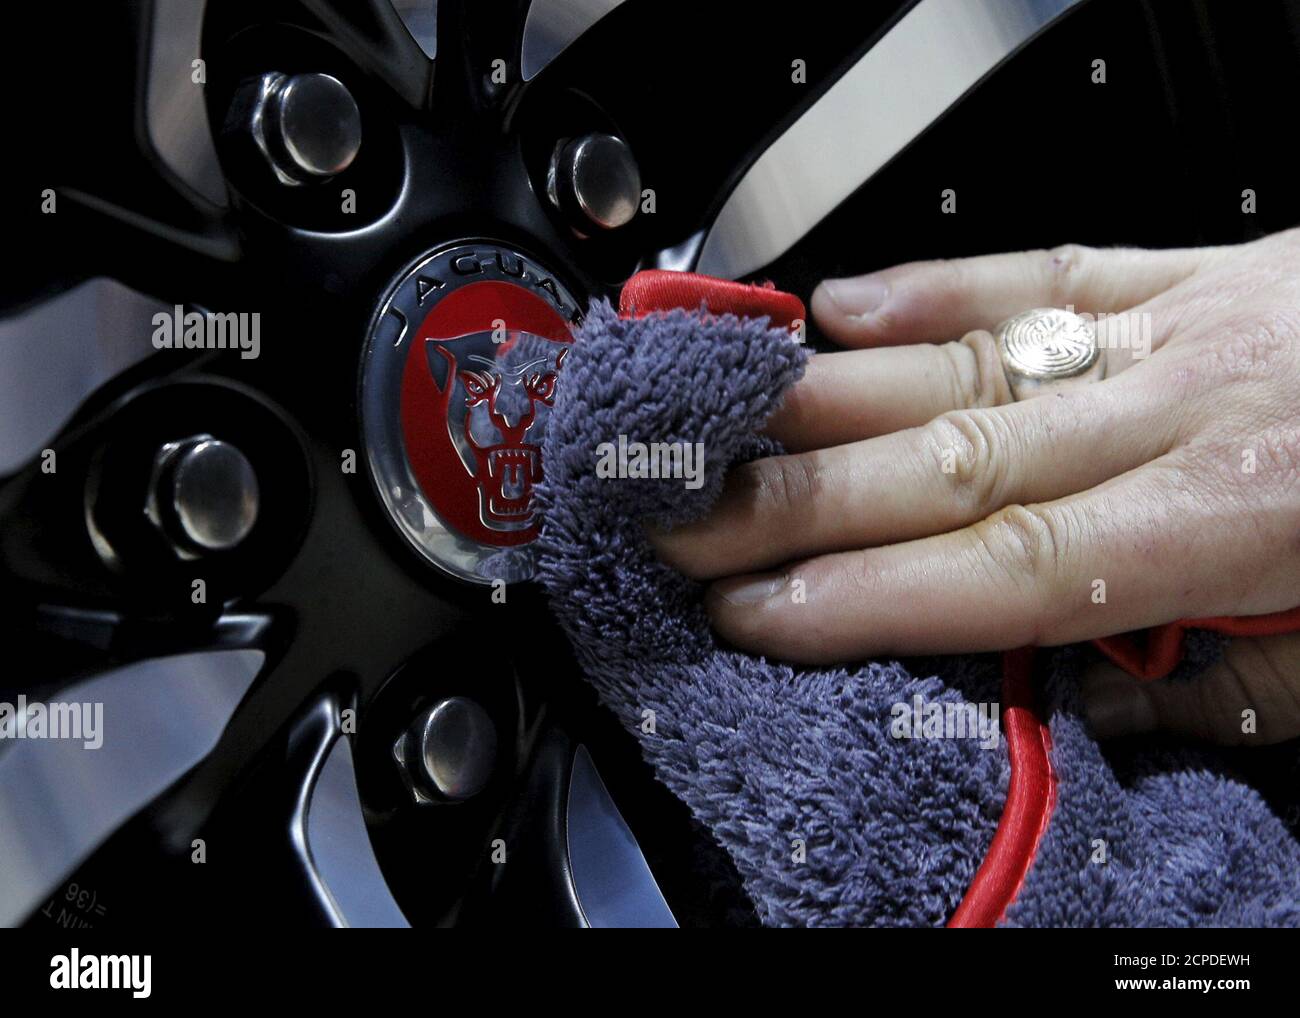 A worker polishes a wheel on a Jaguar 2017 F-TYPE SVR during the 2016 New York International Auto Show media preview in Manhattan, New York March 23, 2016. REUTERS/Brendan McDermid Stock Photo